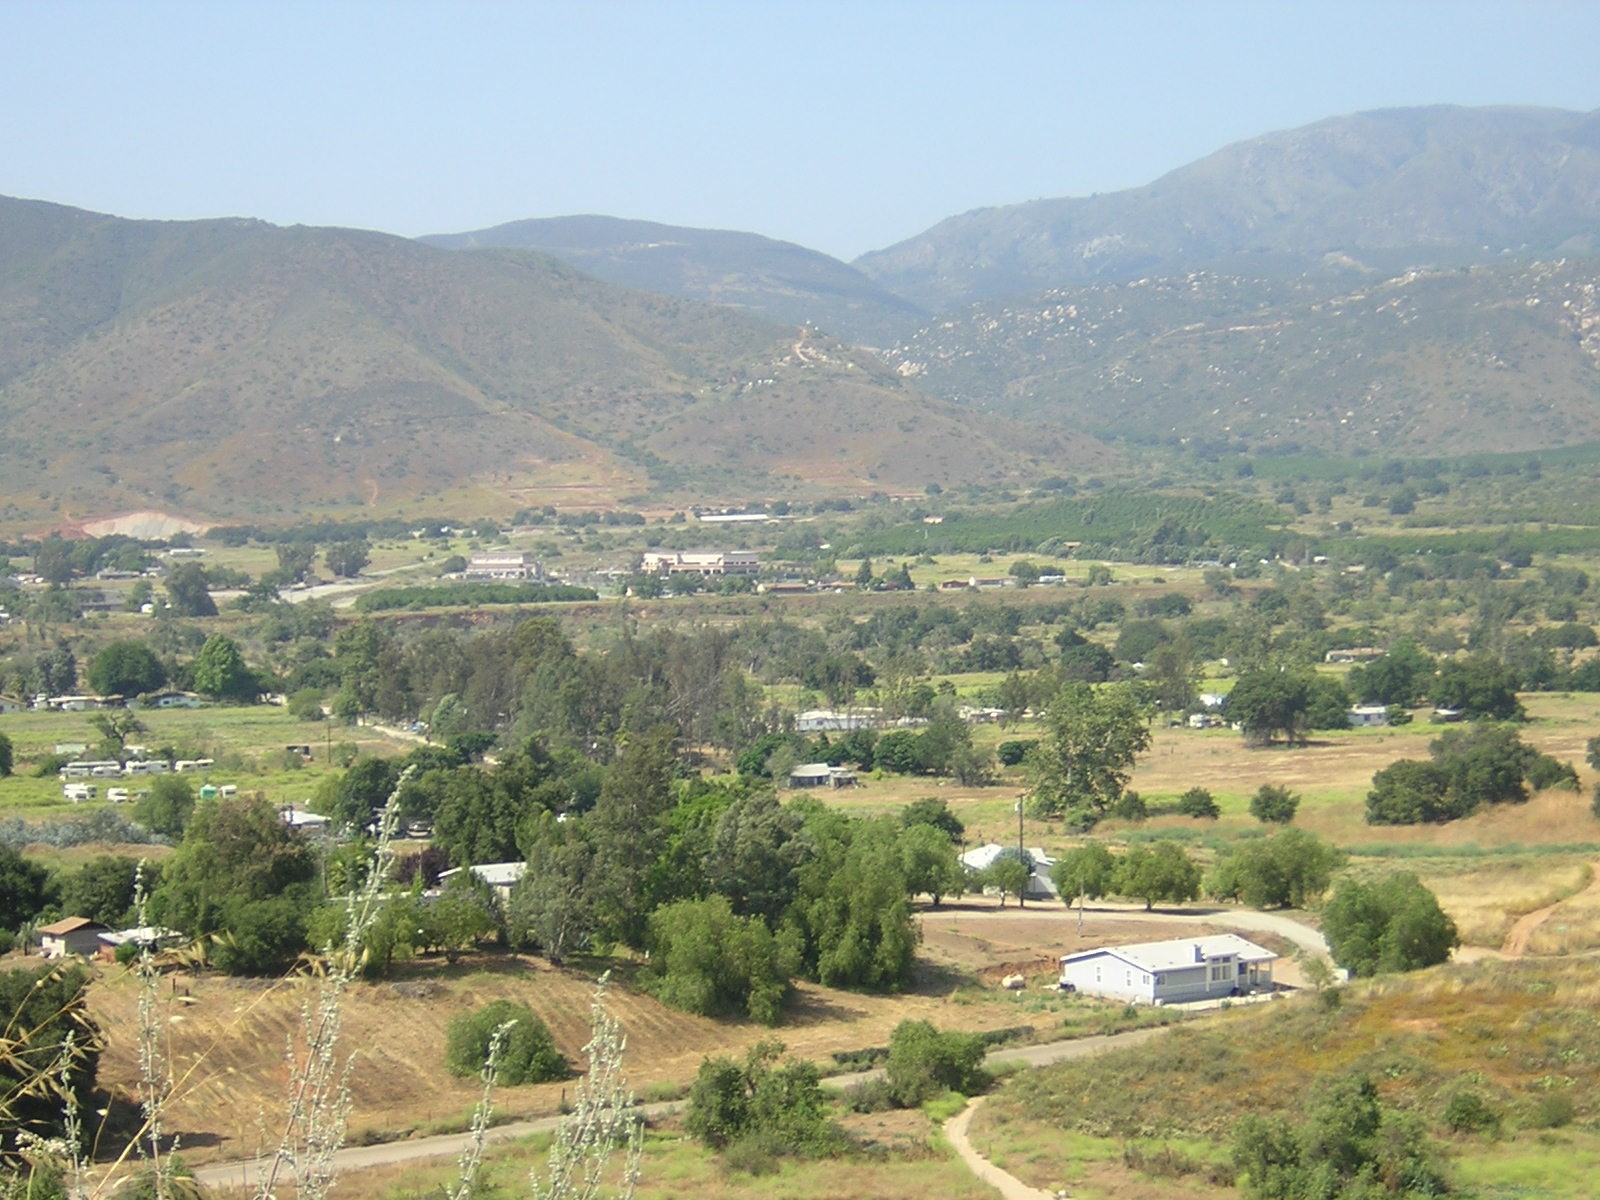 A lightly wooded valley surrounded by desert mountains with houses, roads, and agricultural fields